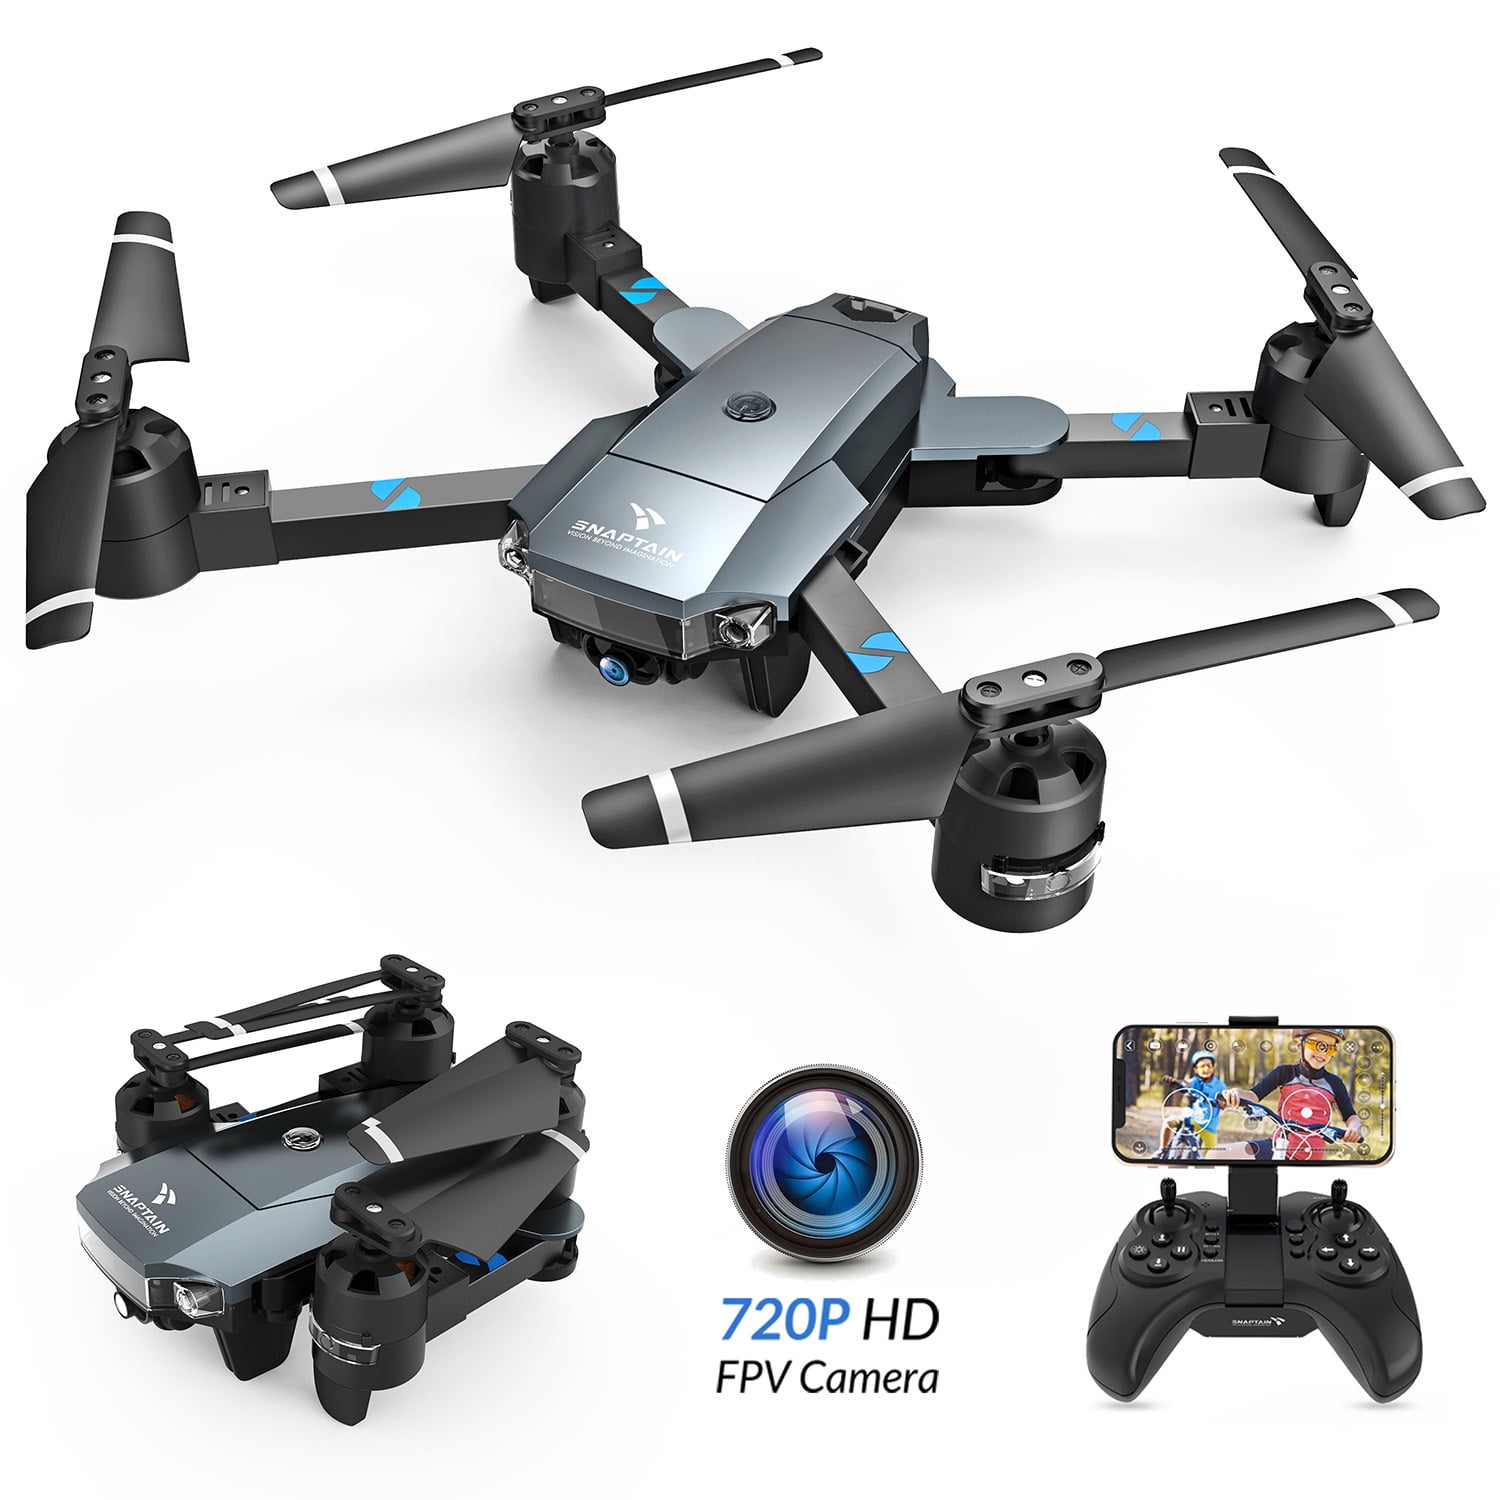 Quadcopter With HD Camera WiFi Live Video APP Remote Control Headless Mode Drone 